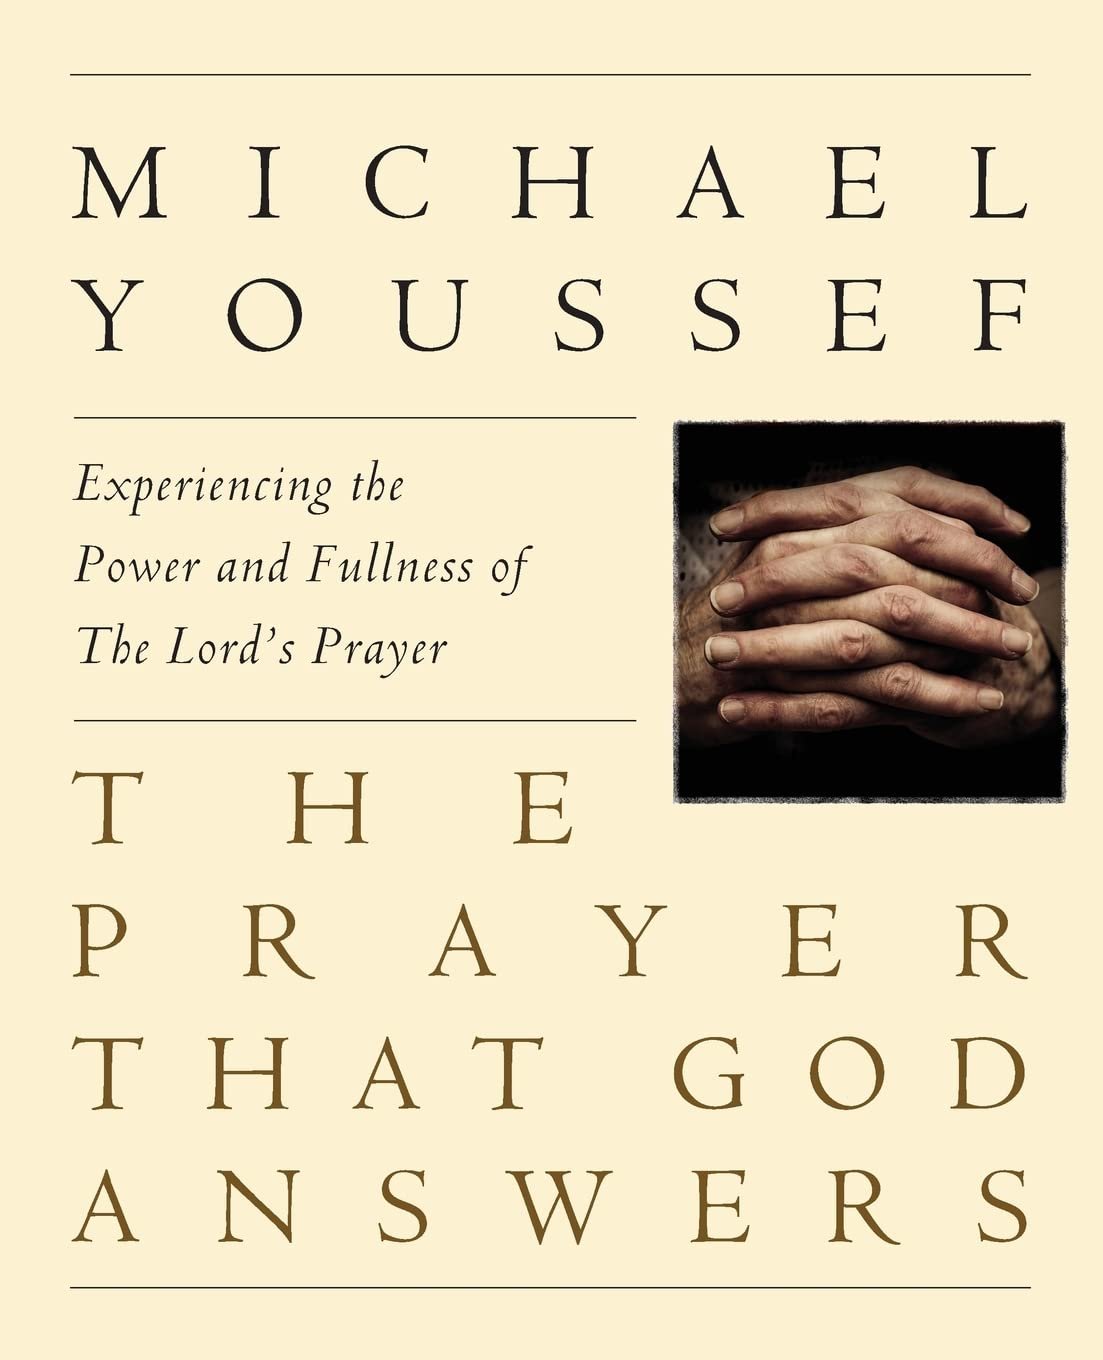 “Prayer that God Answers: Experience the Power and Fullness of the Lord's Prayer” - by Dr. Michael Youssef